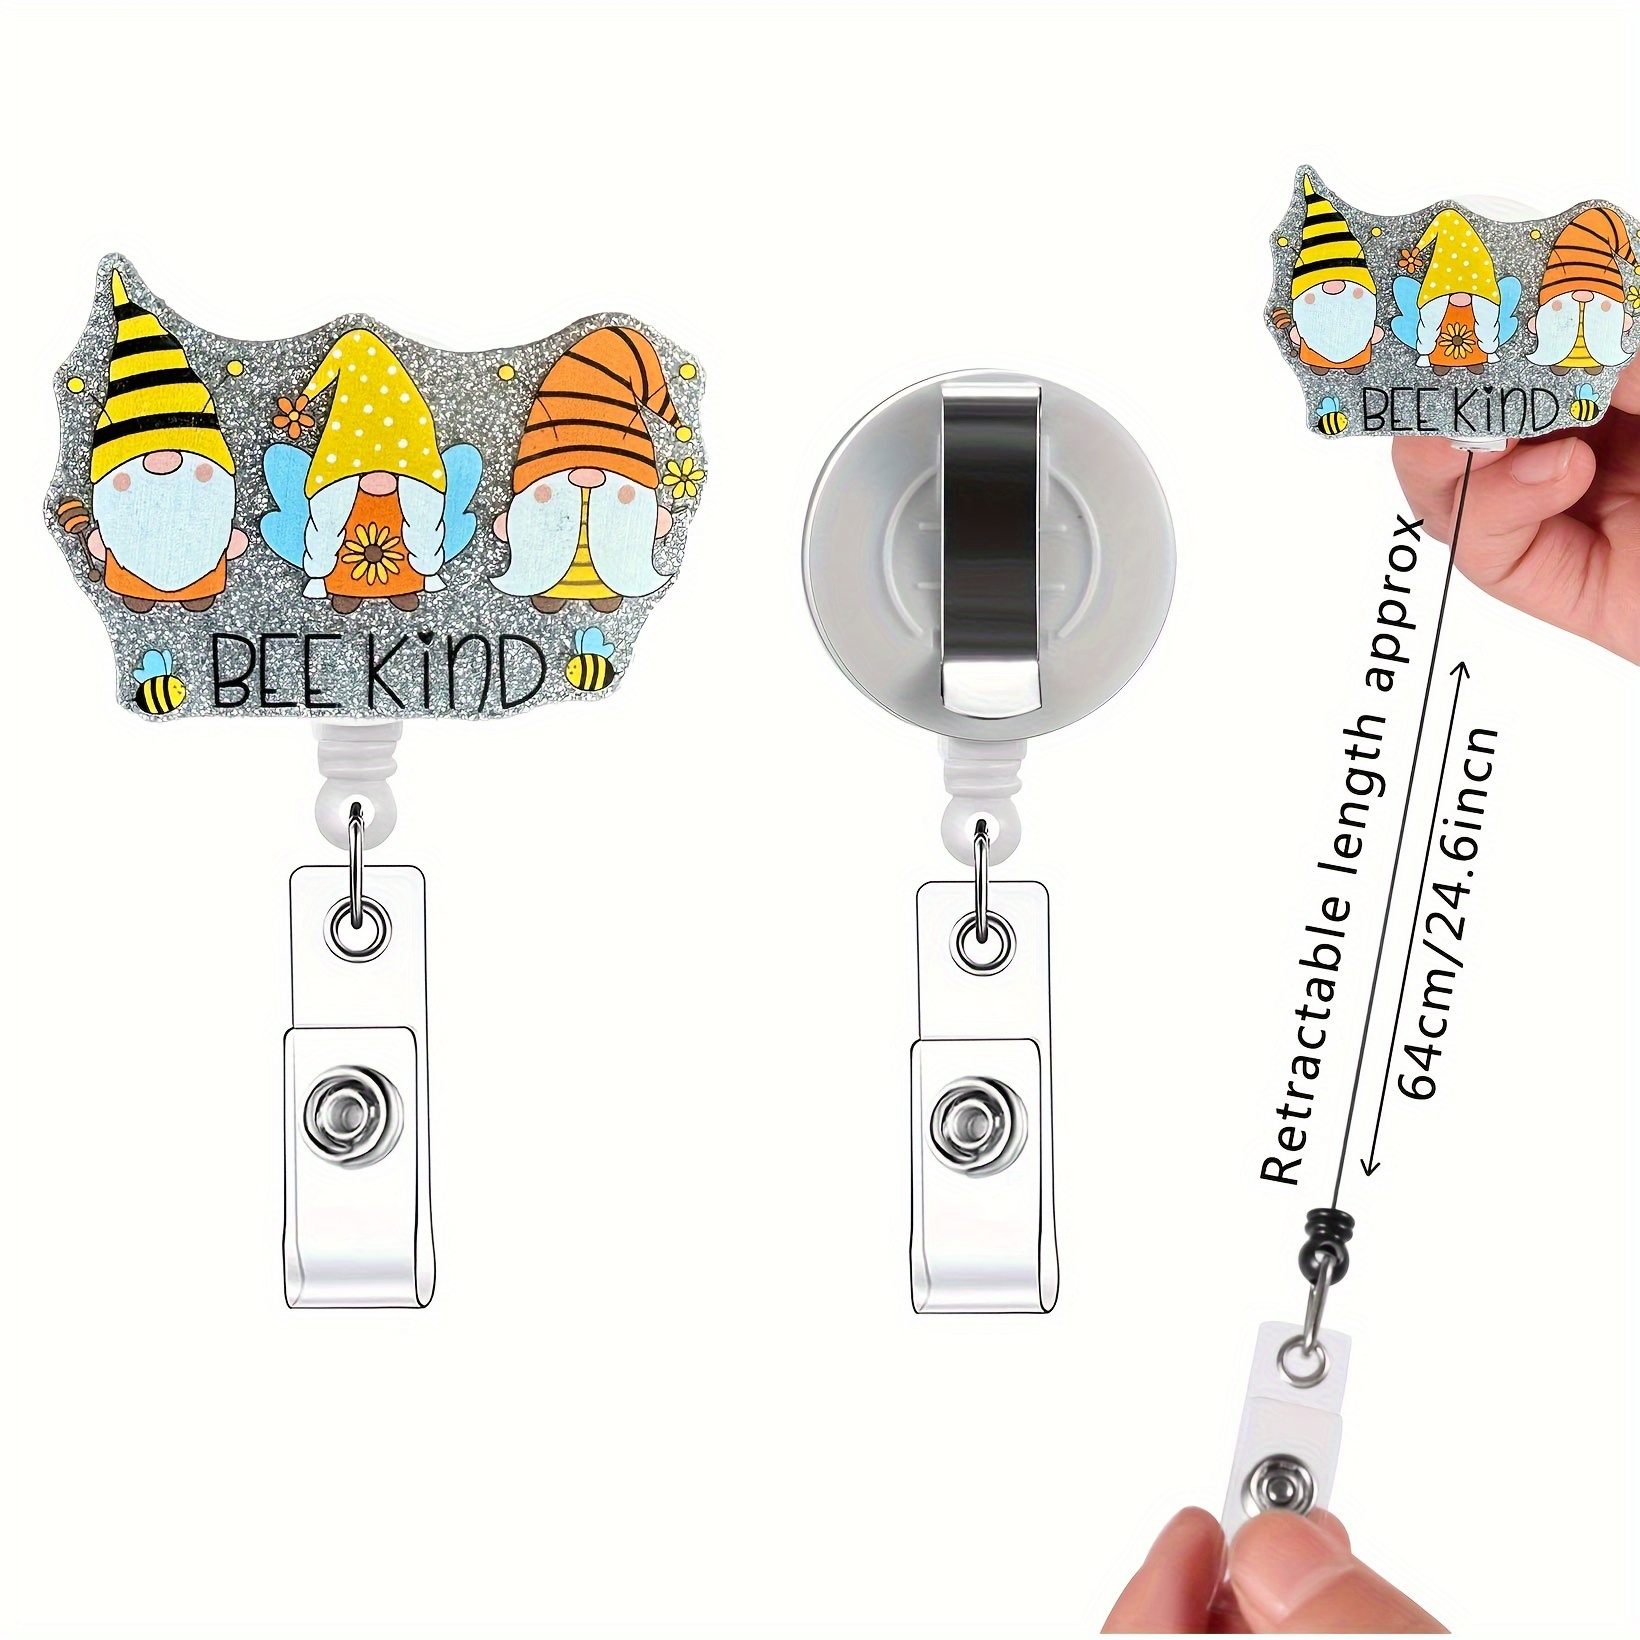  Bee Kind Badge Reels Holder Retractable with Clip for